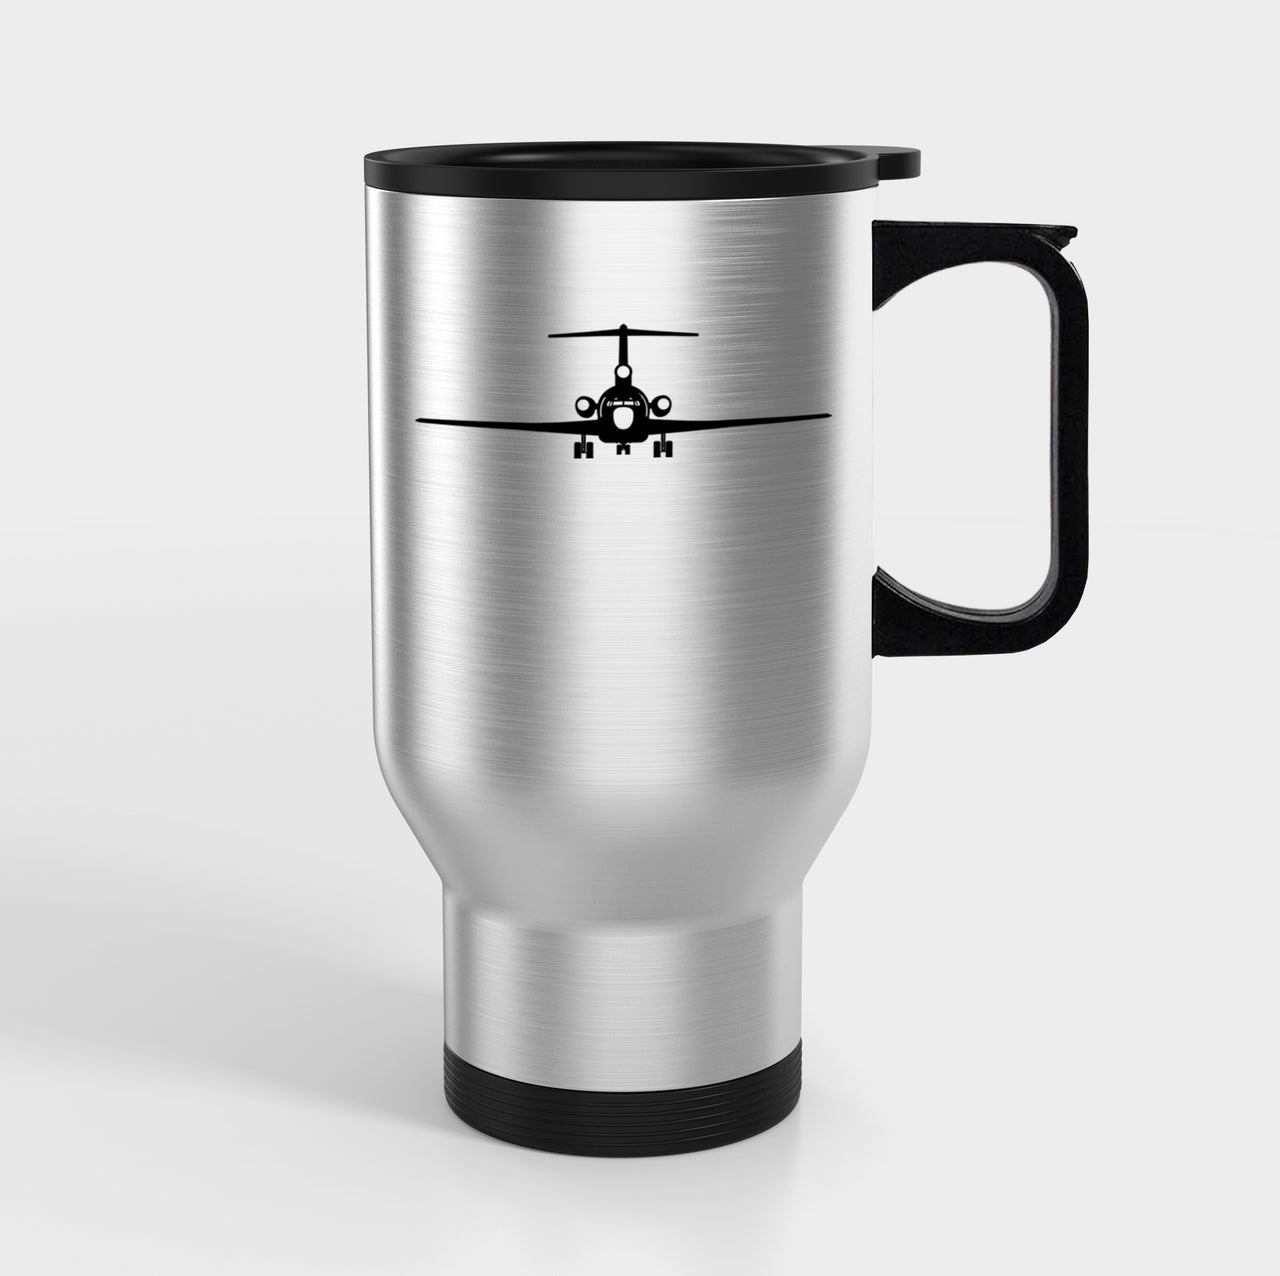 Boeing 727 Silhouette Designed Travel Mugs (With Holder)